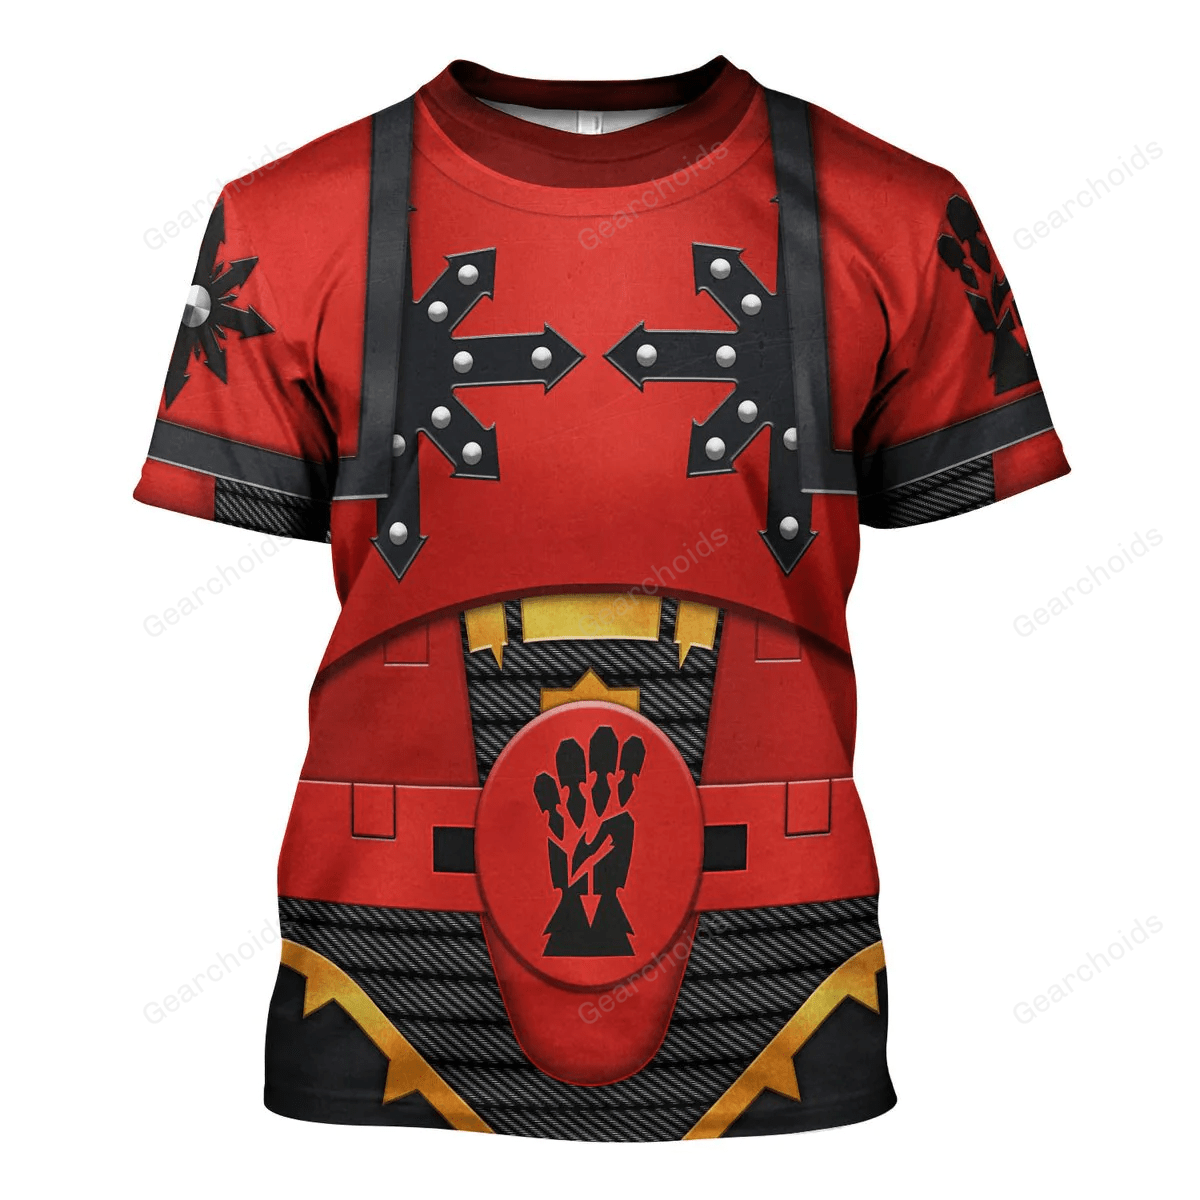 A Red Corsairs Heretic Astartes - Costume Cosplay T-shirt